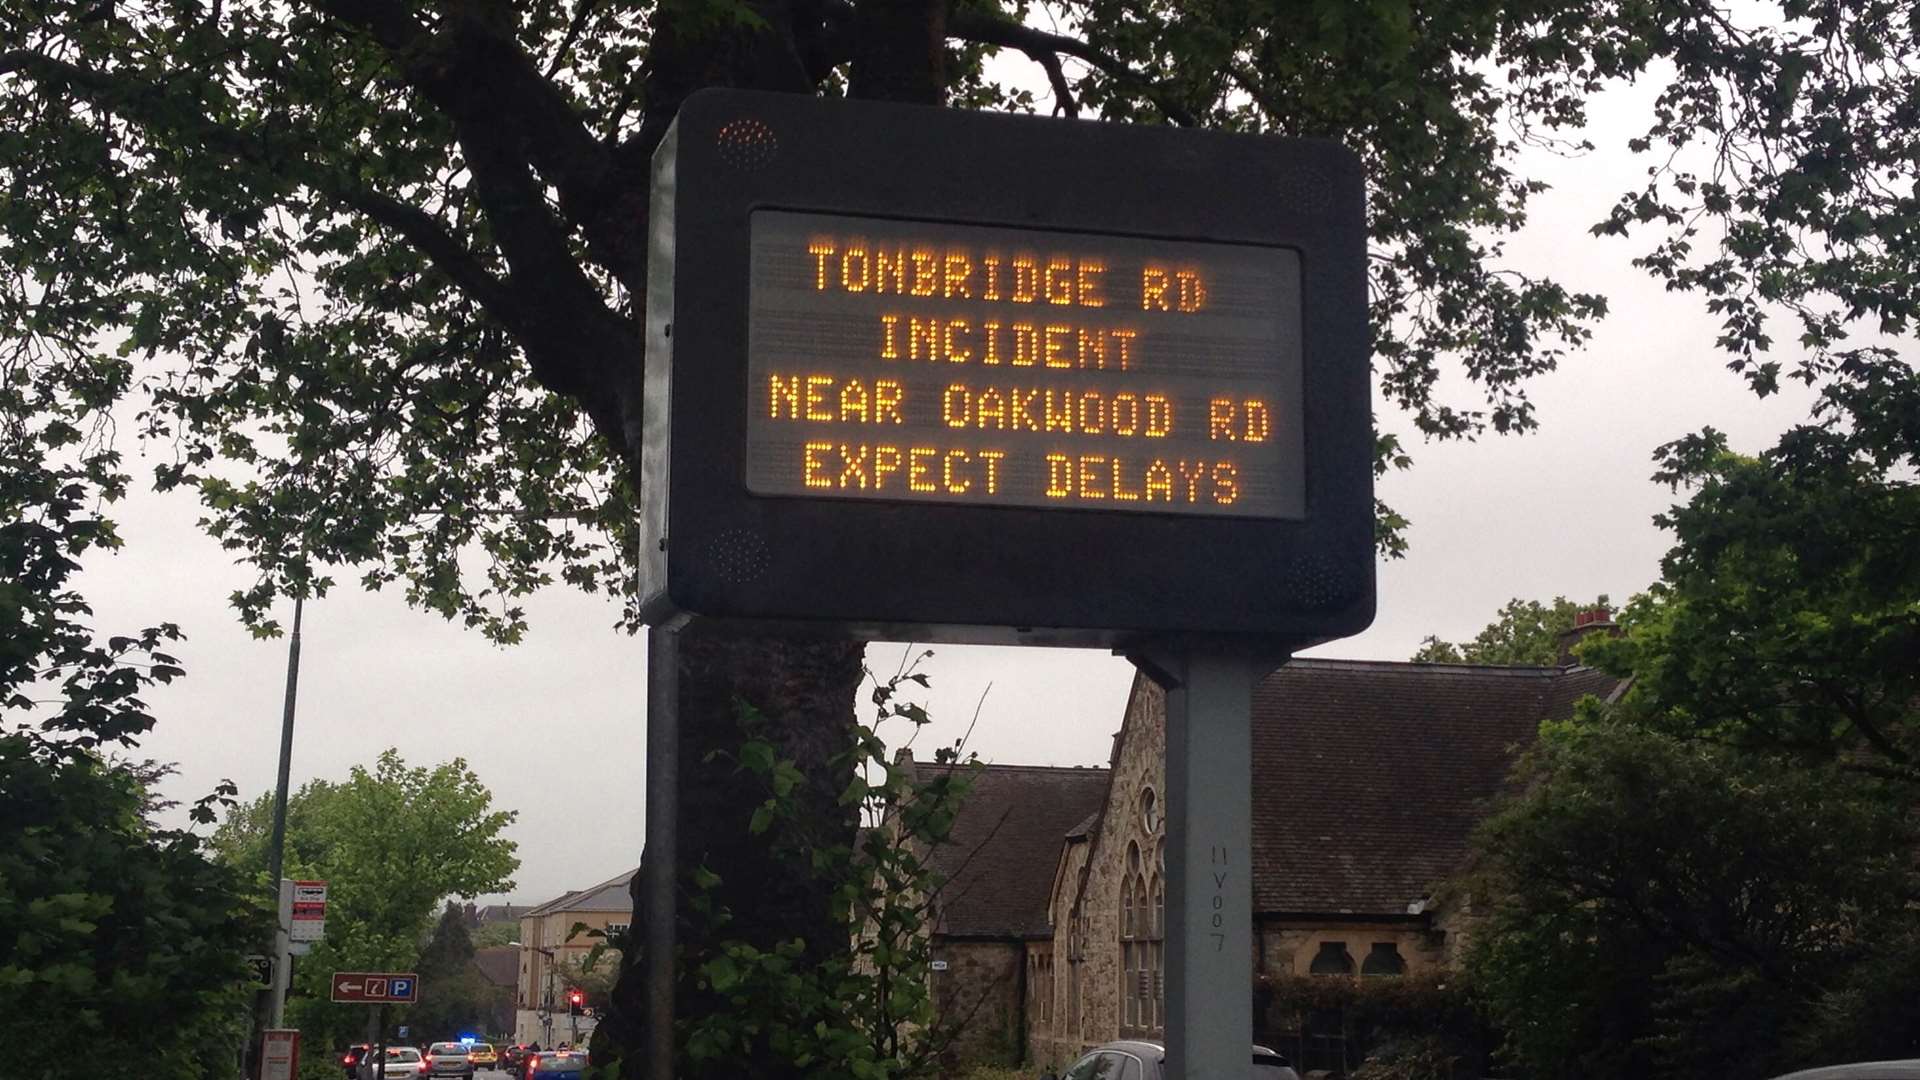 The incident is causing delays on Tonbridge Road